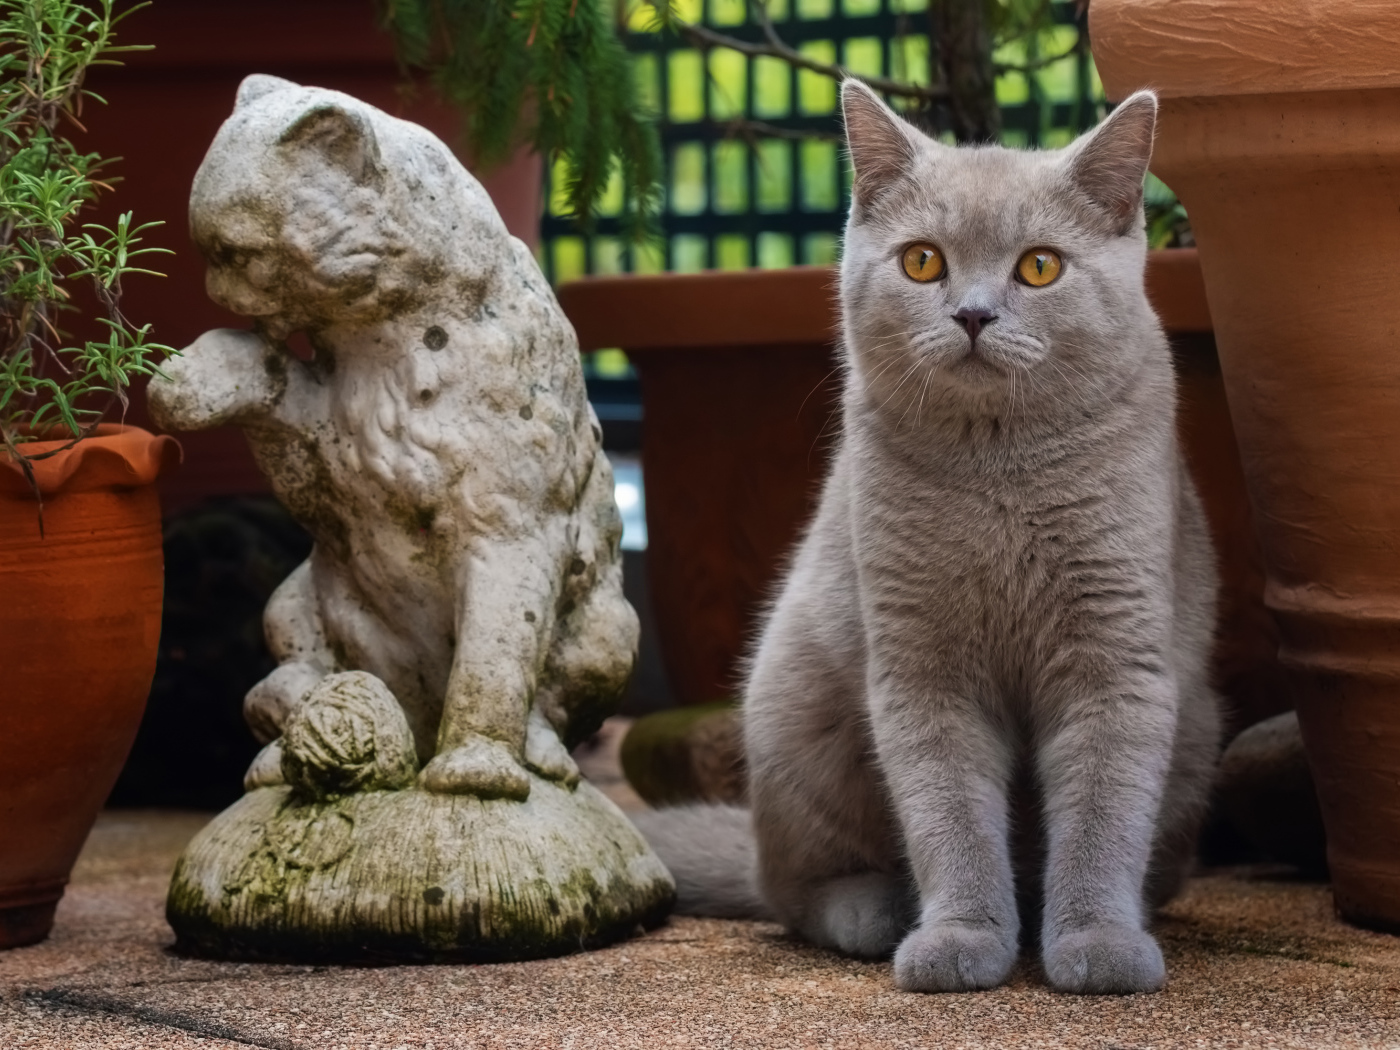 Gray british cat sits by a cat figurine